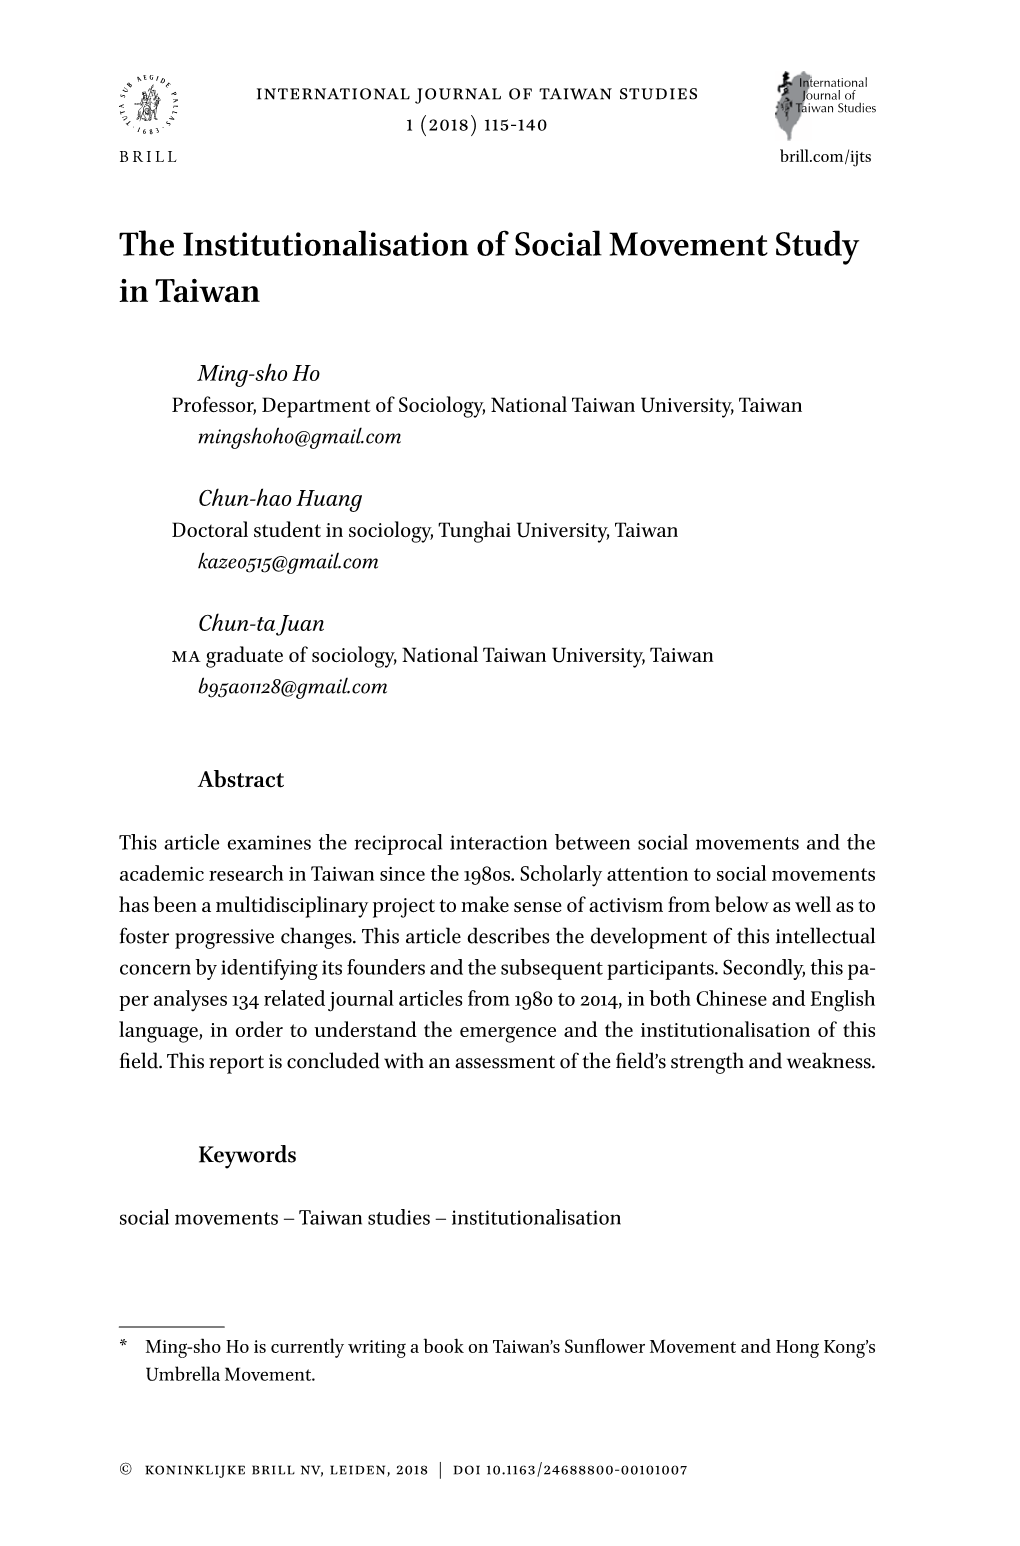 The Institutionalisation of Social Movement Study in Taiwan